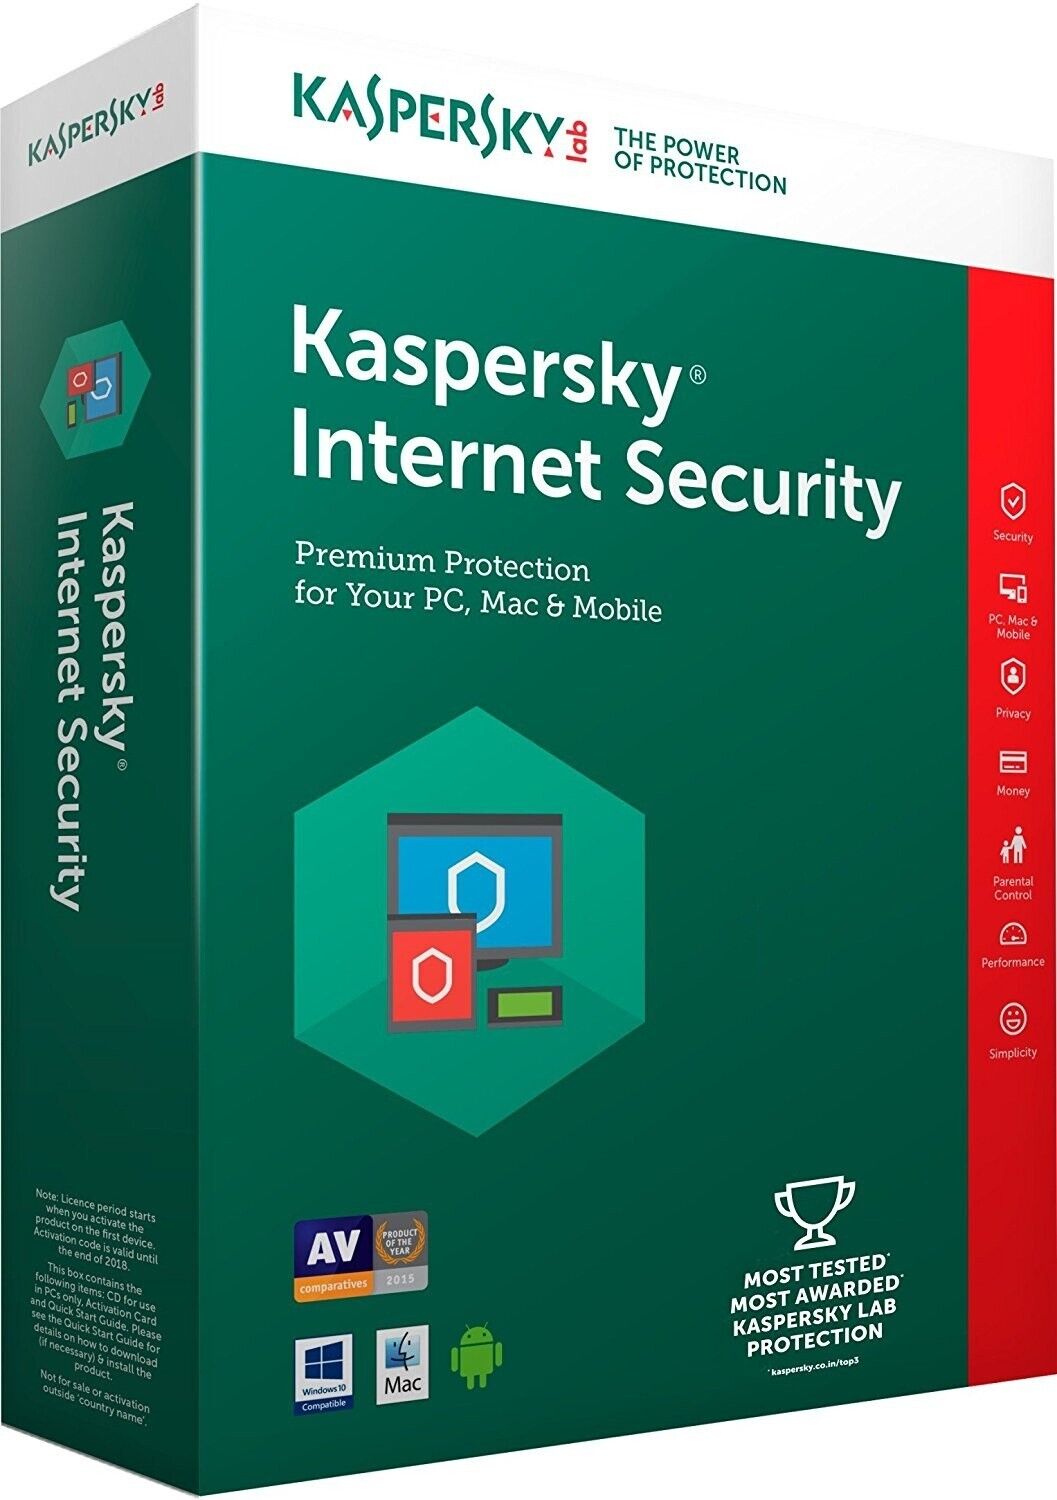 KASPERSKY INTERNET SECURITY - Picture 1 of 1